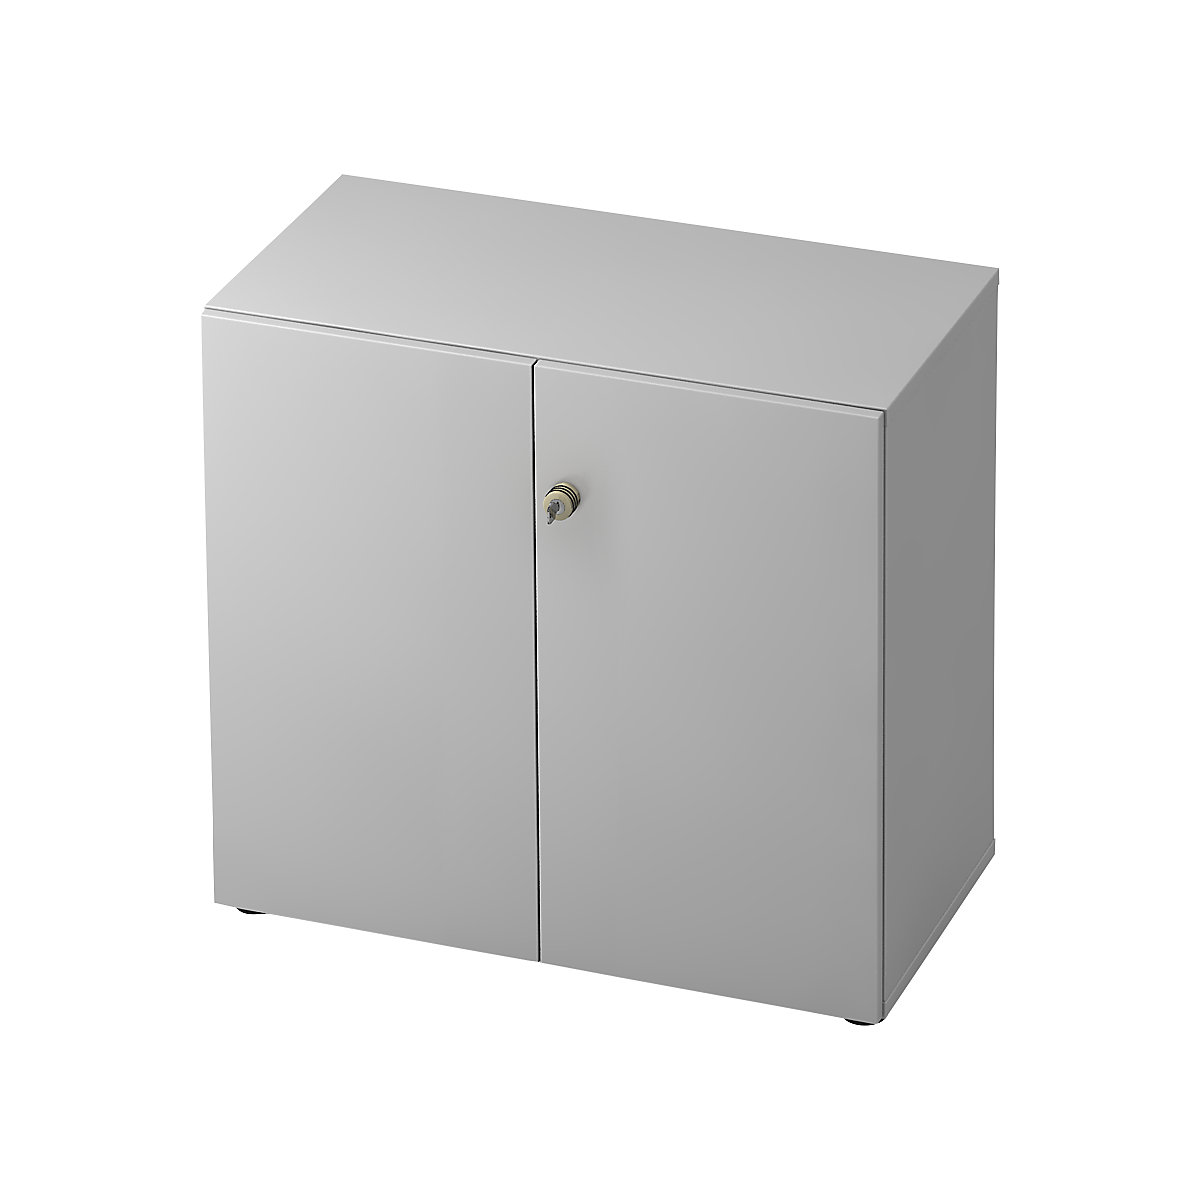 Filing cupboard with acoustic rear panel ANNY-AC